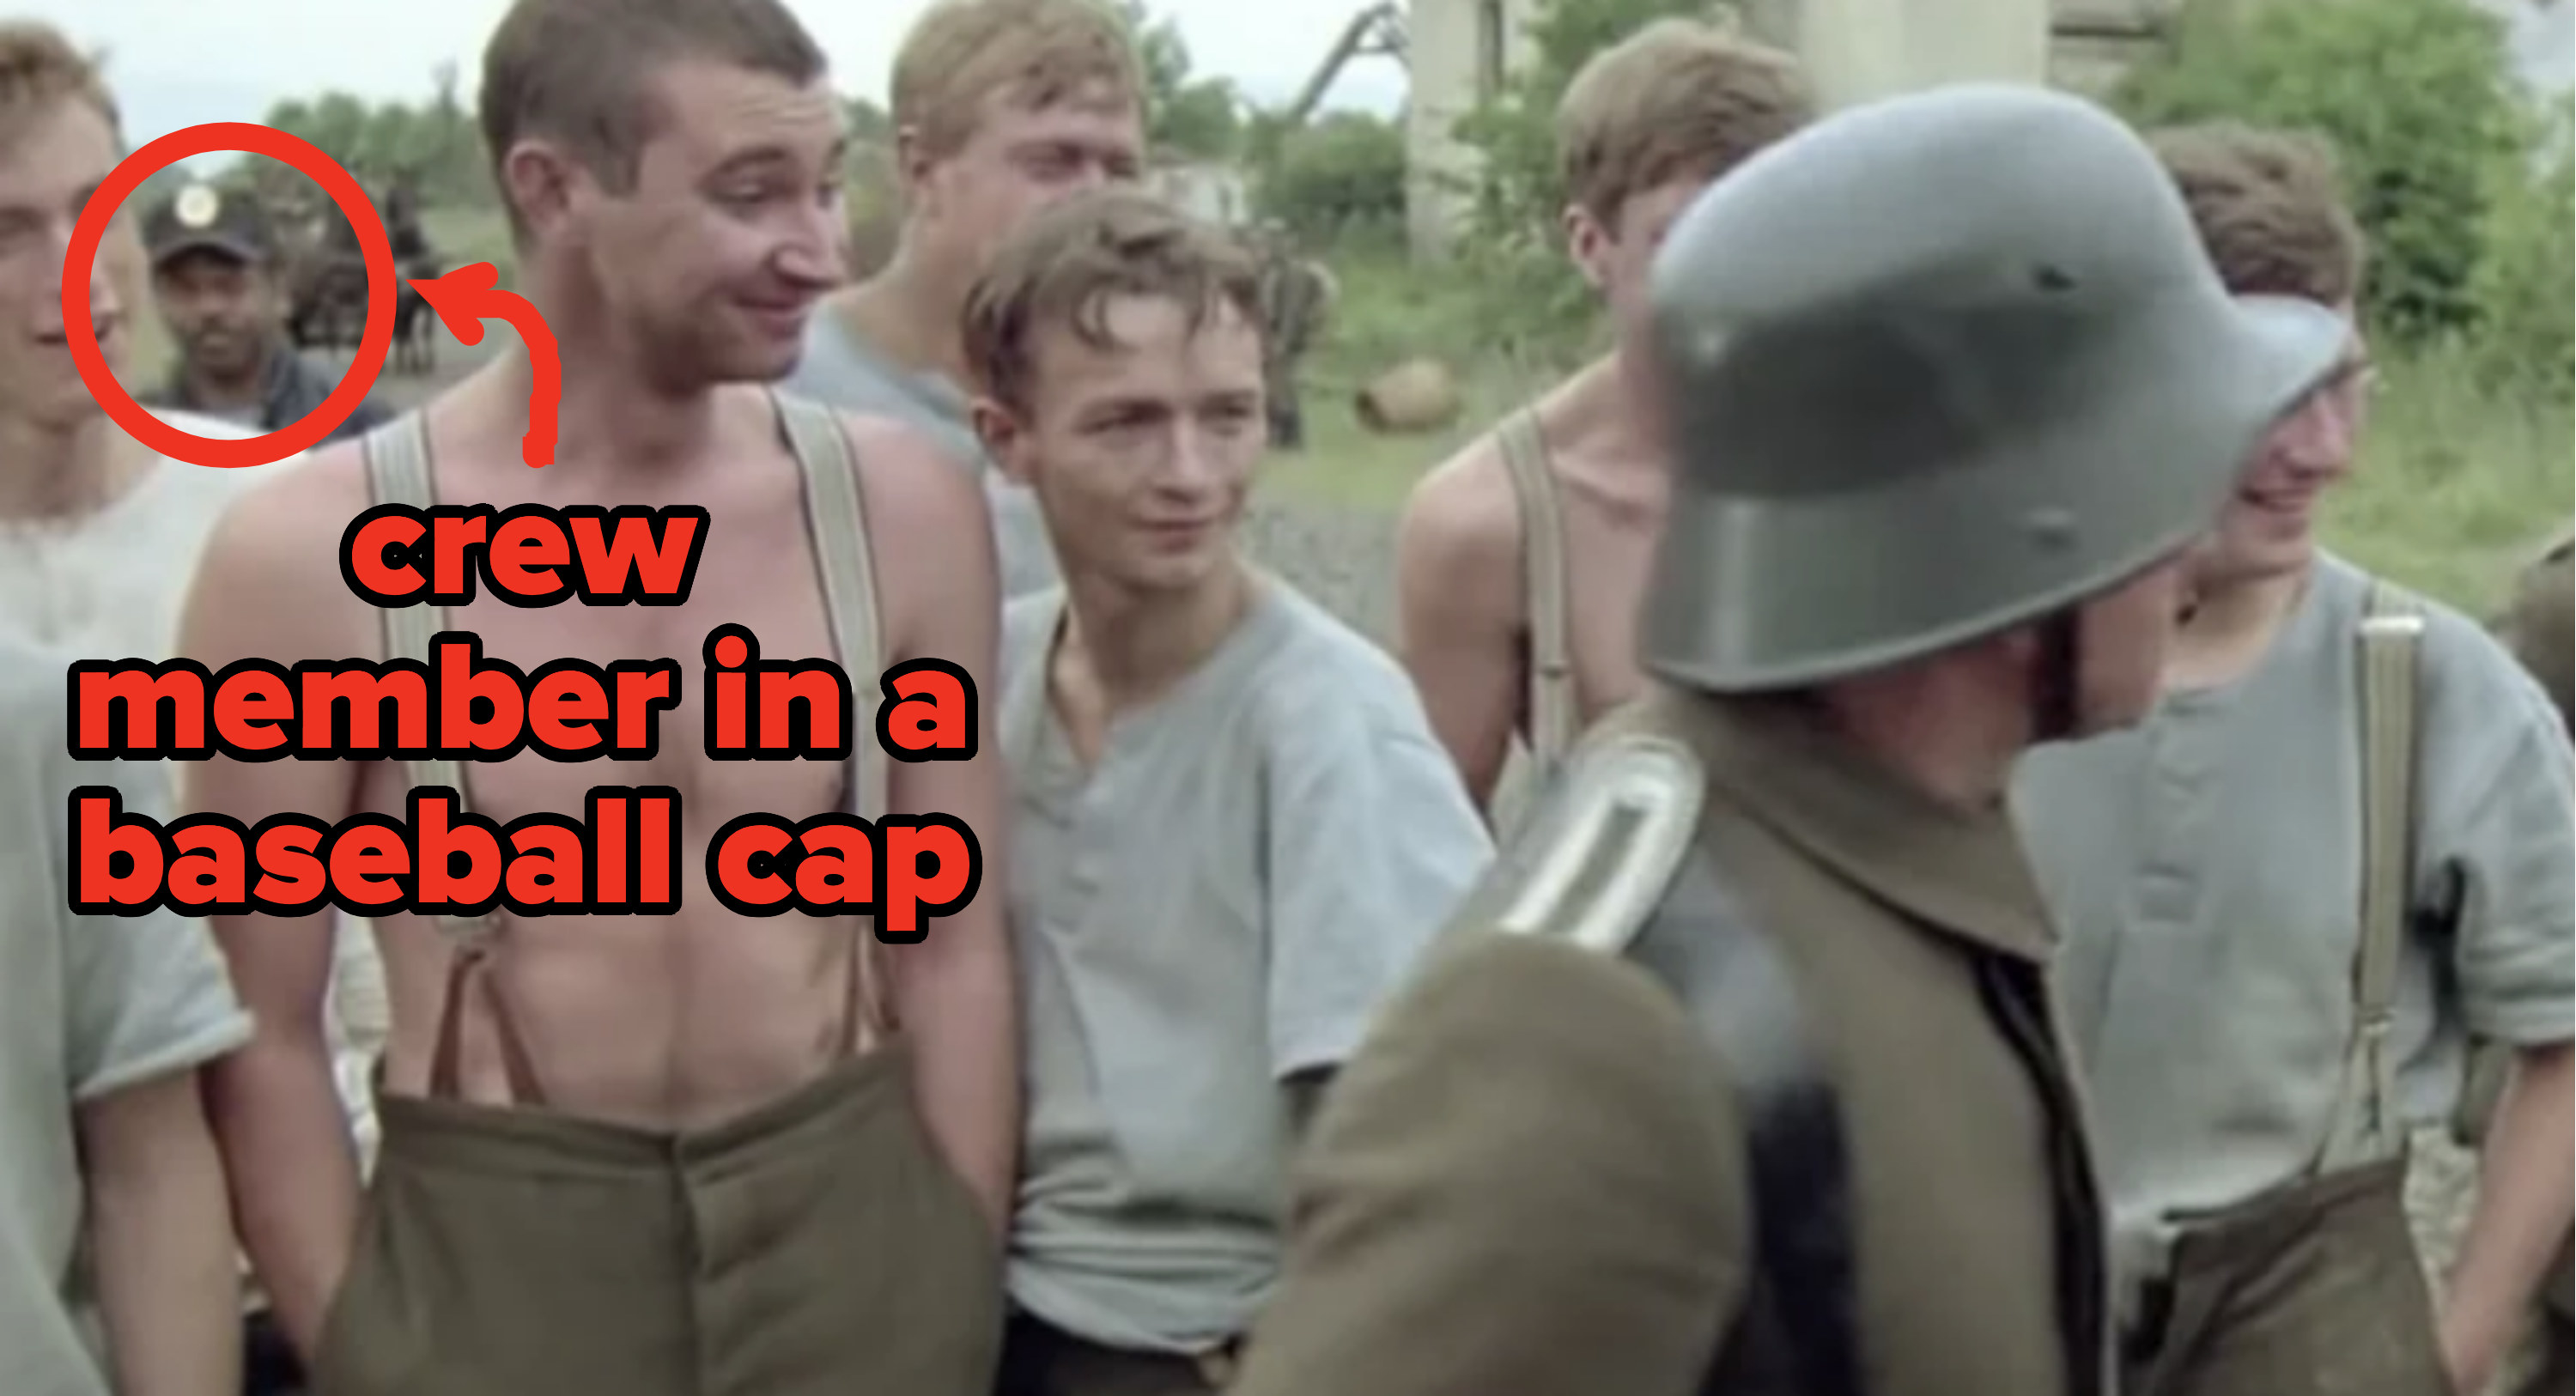 In a war scene full of actors wearing period appropriately military gear, you can clearly see a modern crew member in the background wearing a baseball cap